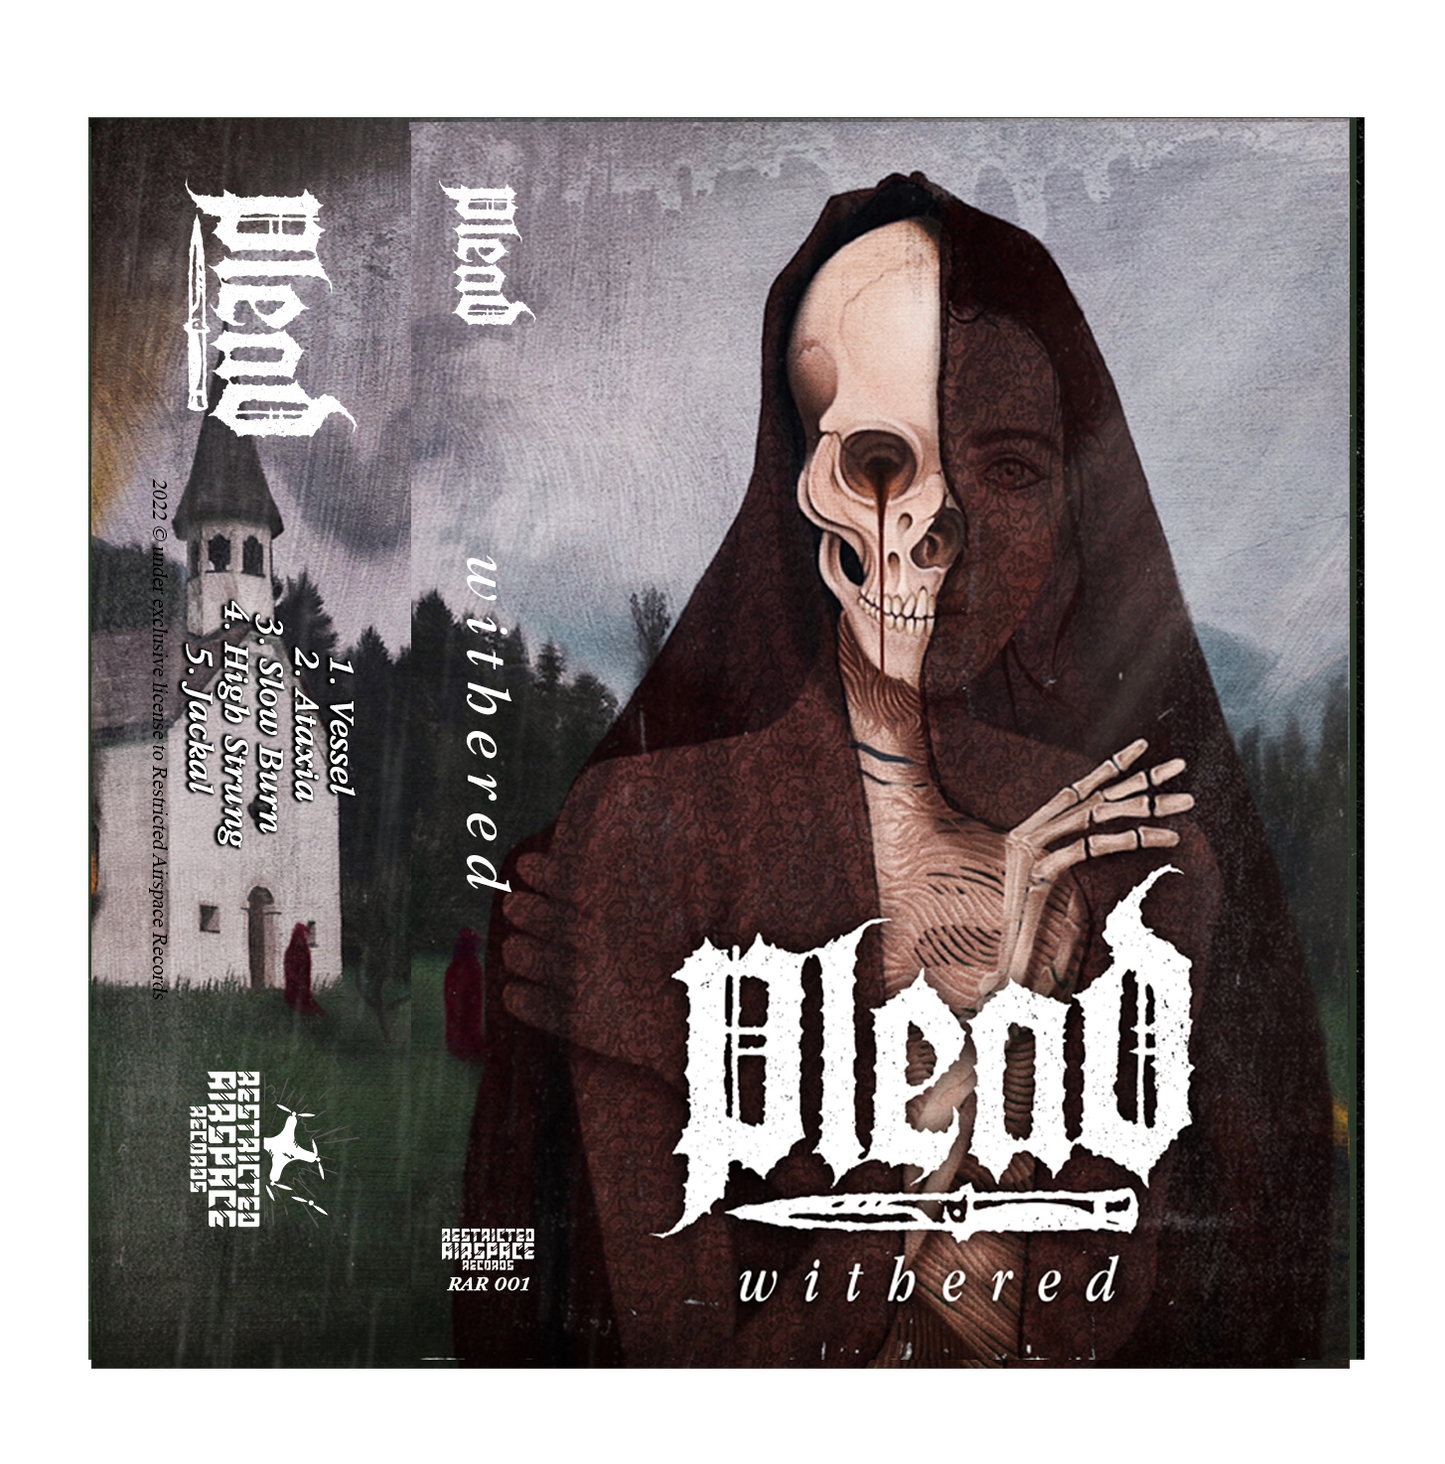 Plead - 'Withered'